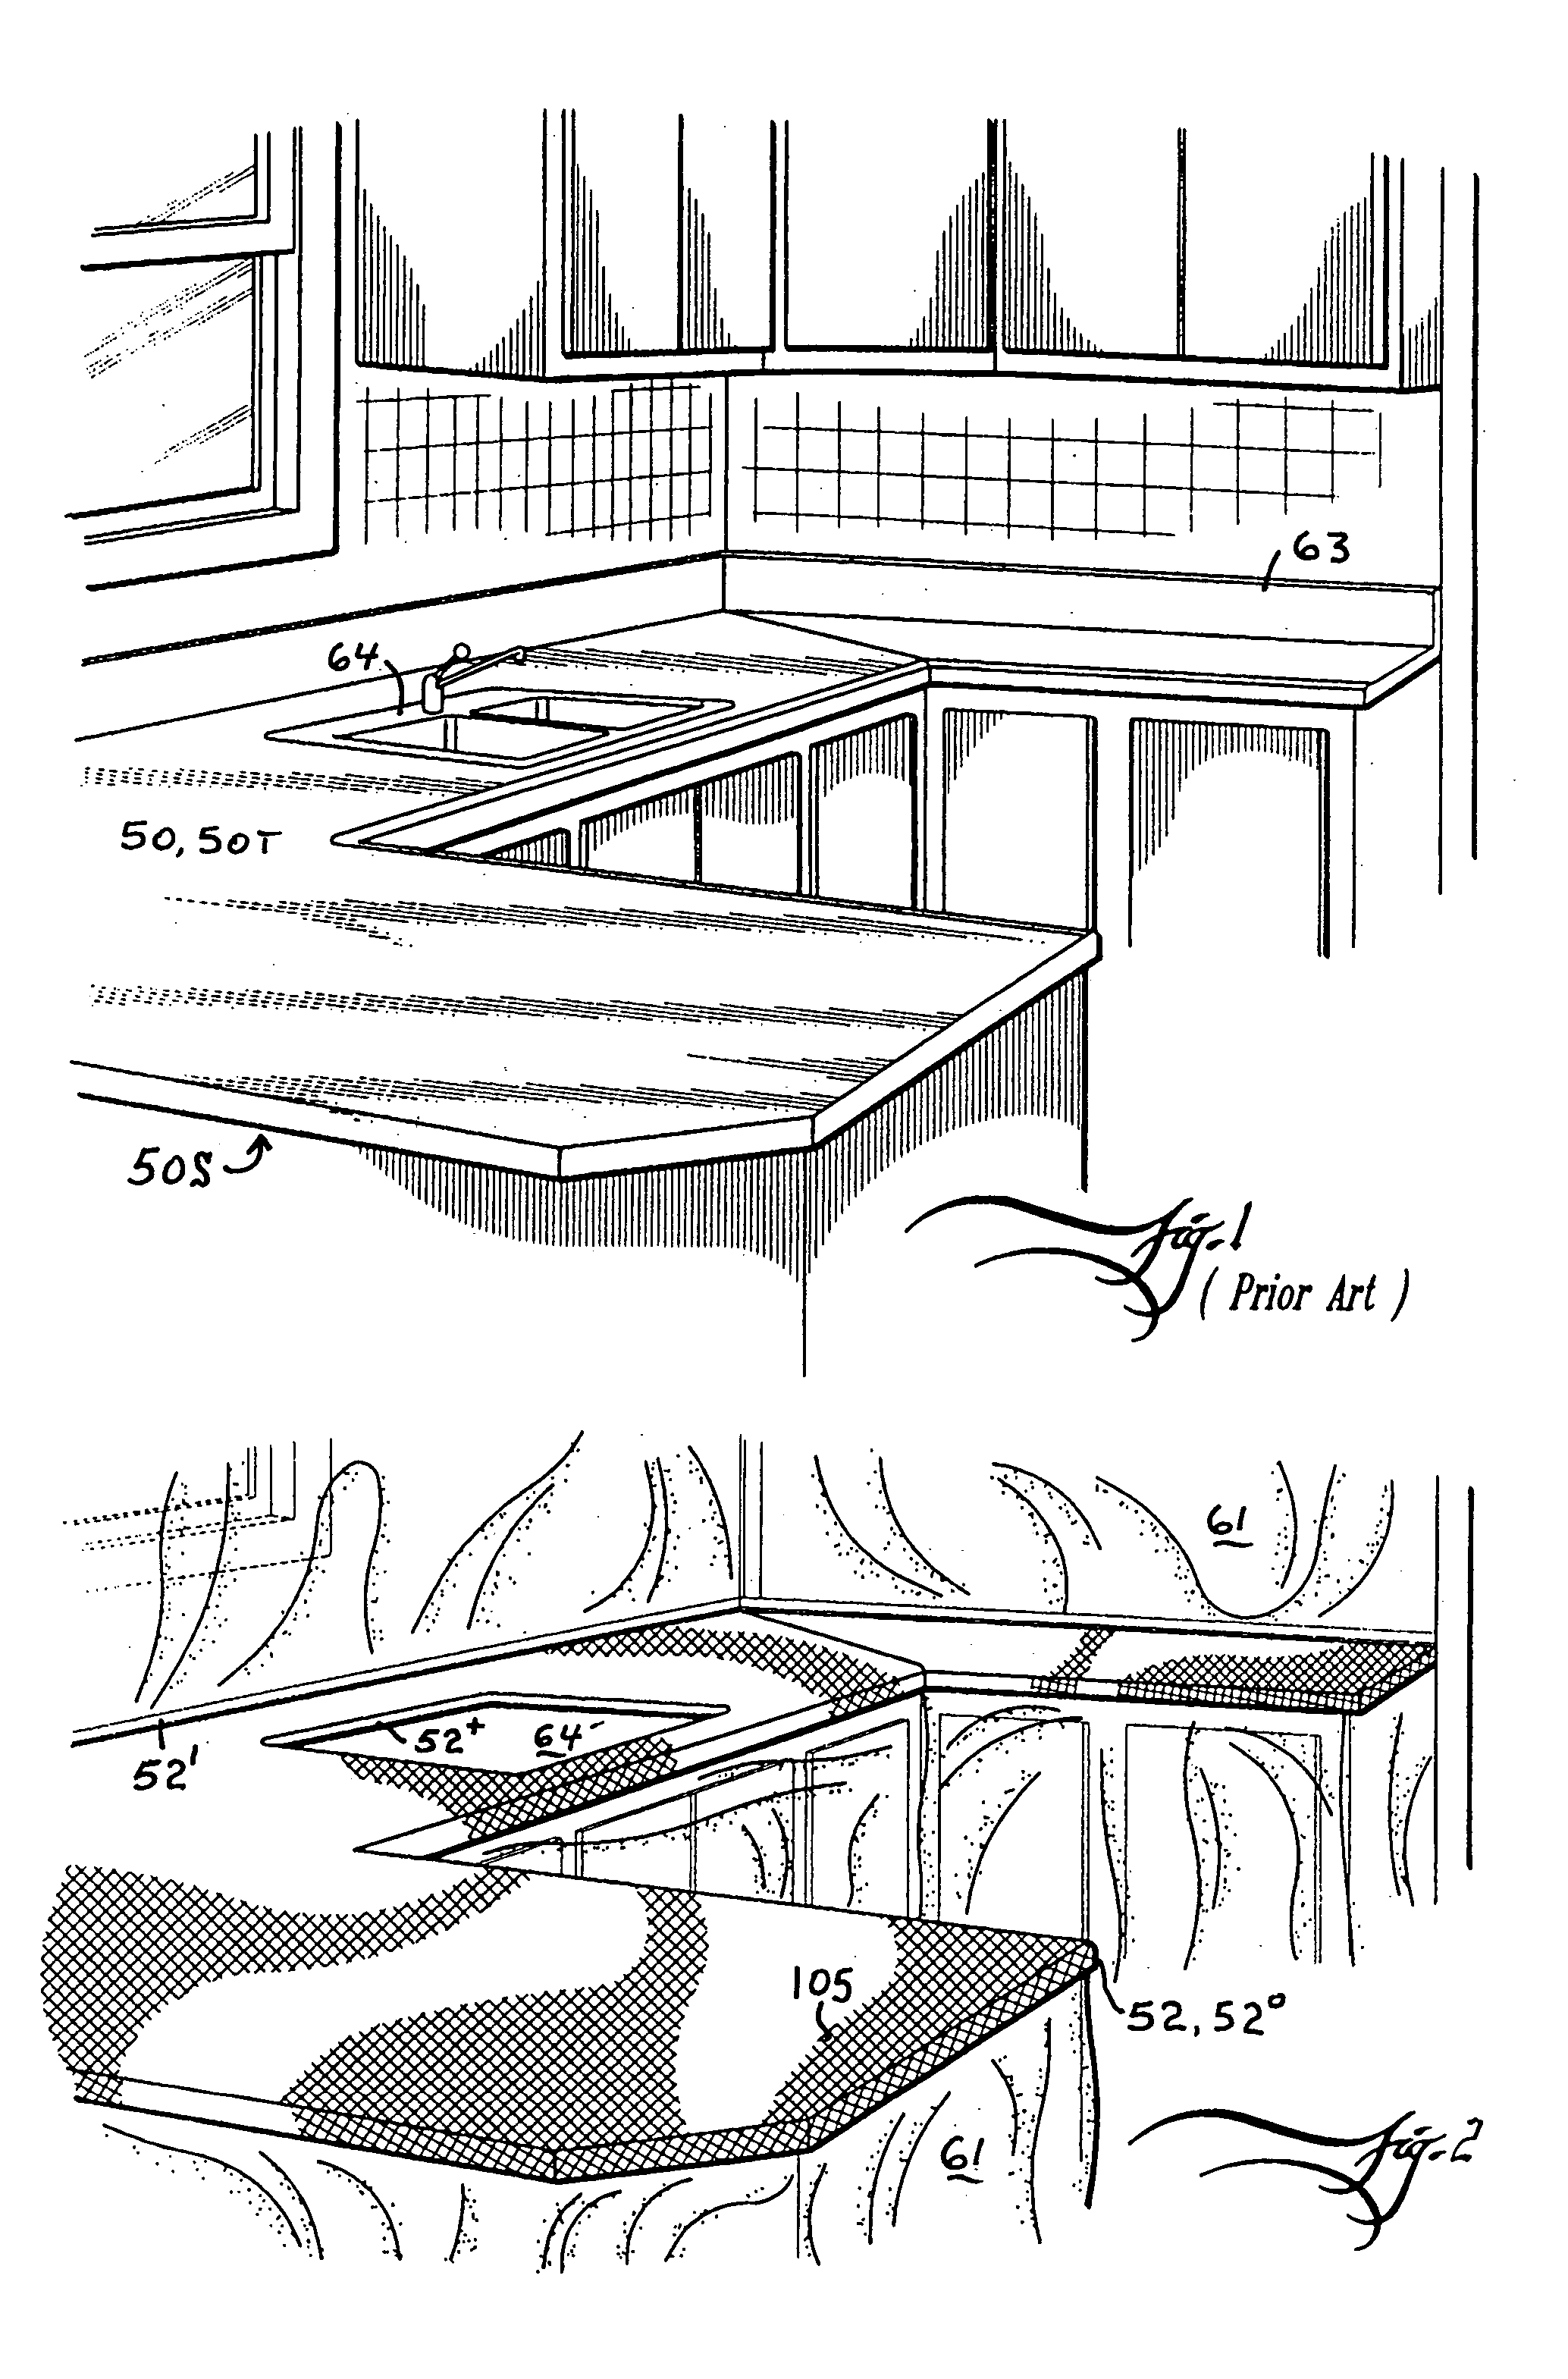 Method of remodeling a countertop